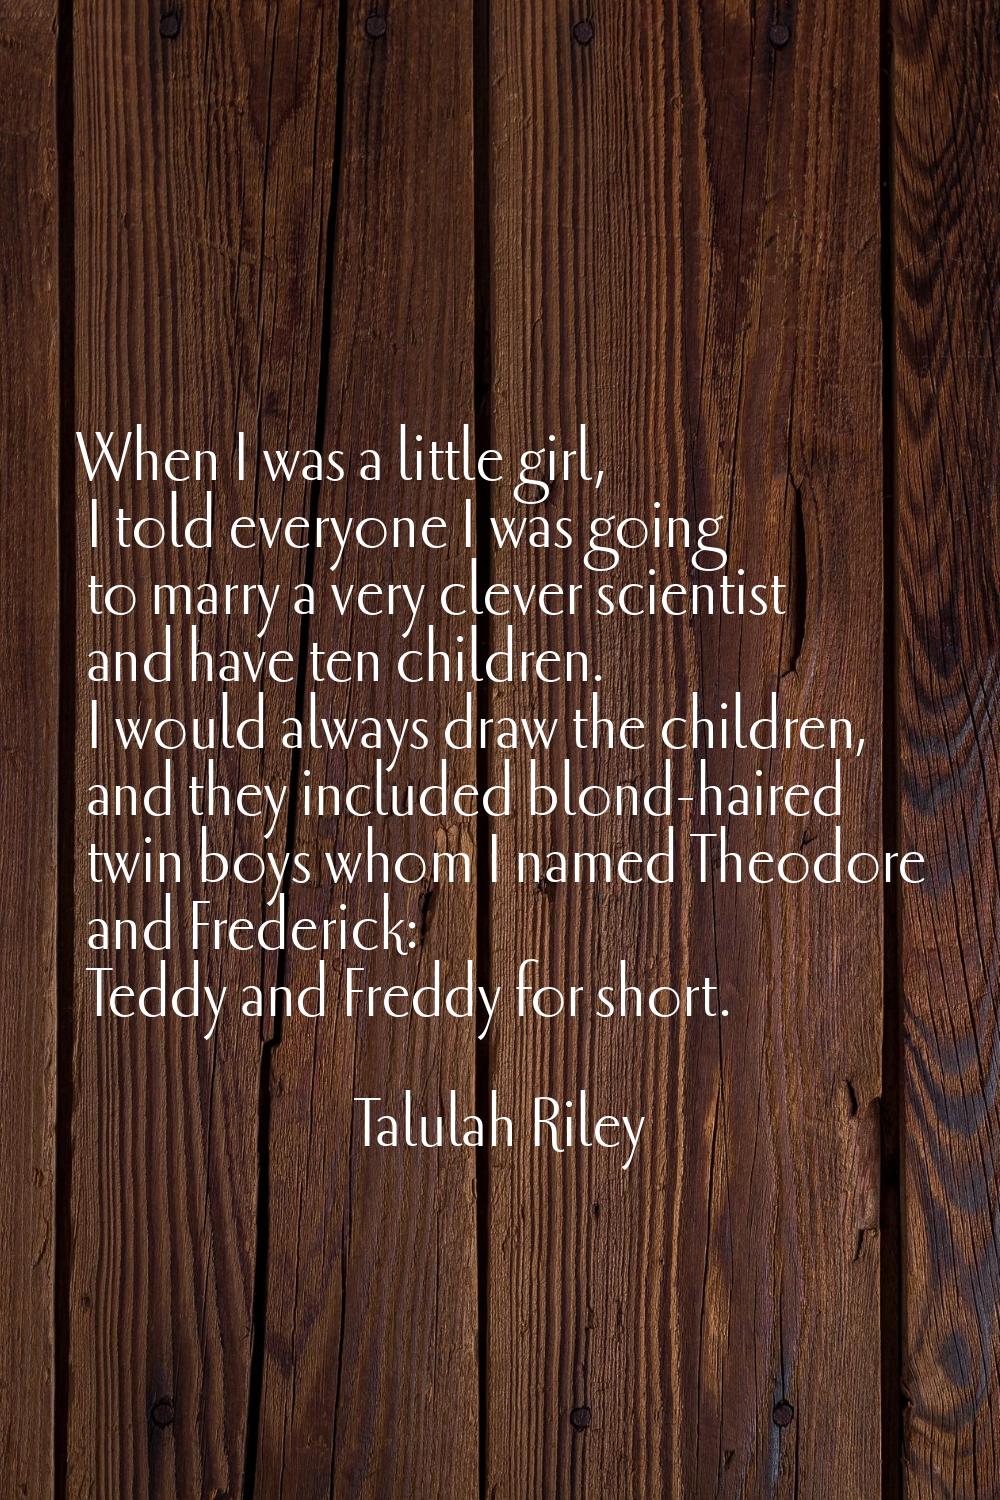 When I was a little girl, I told everyone I was going to marry a very clever scientist and have ten